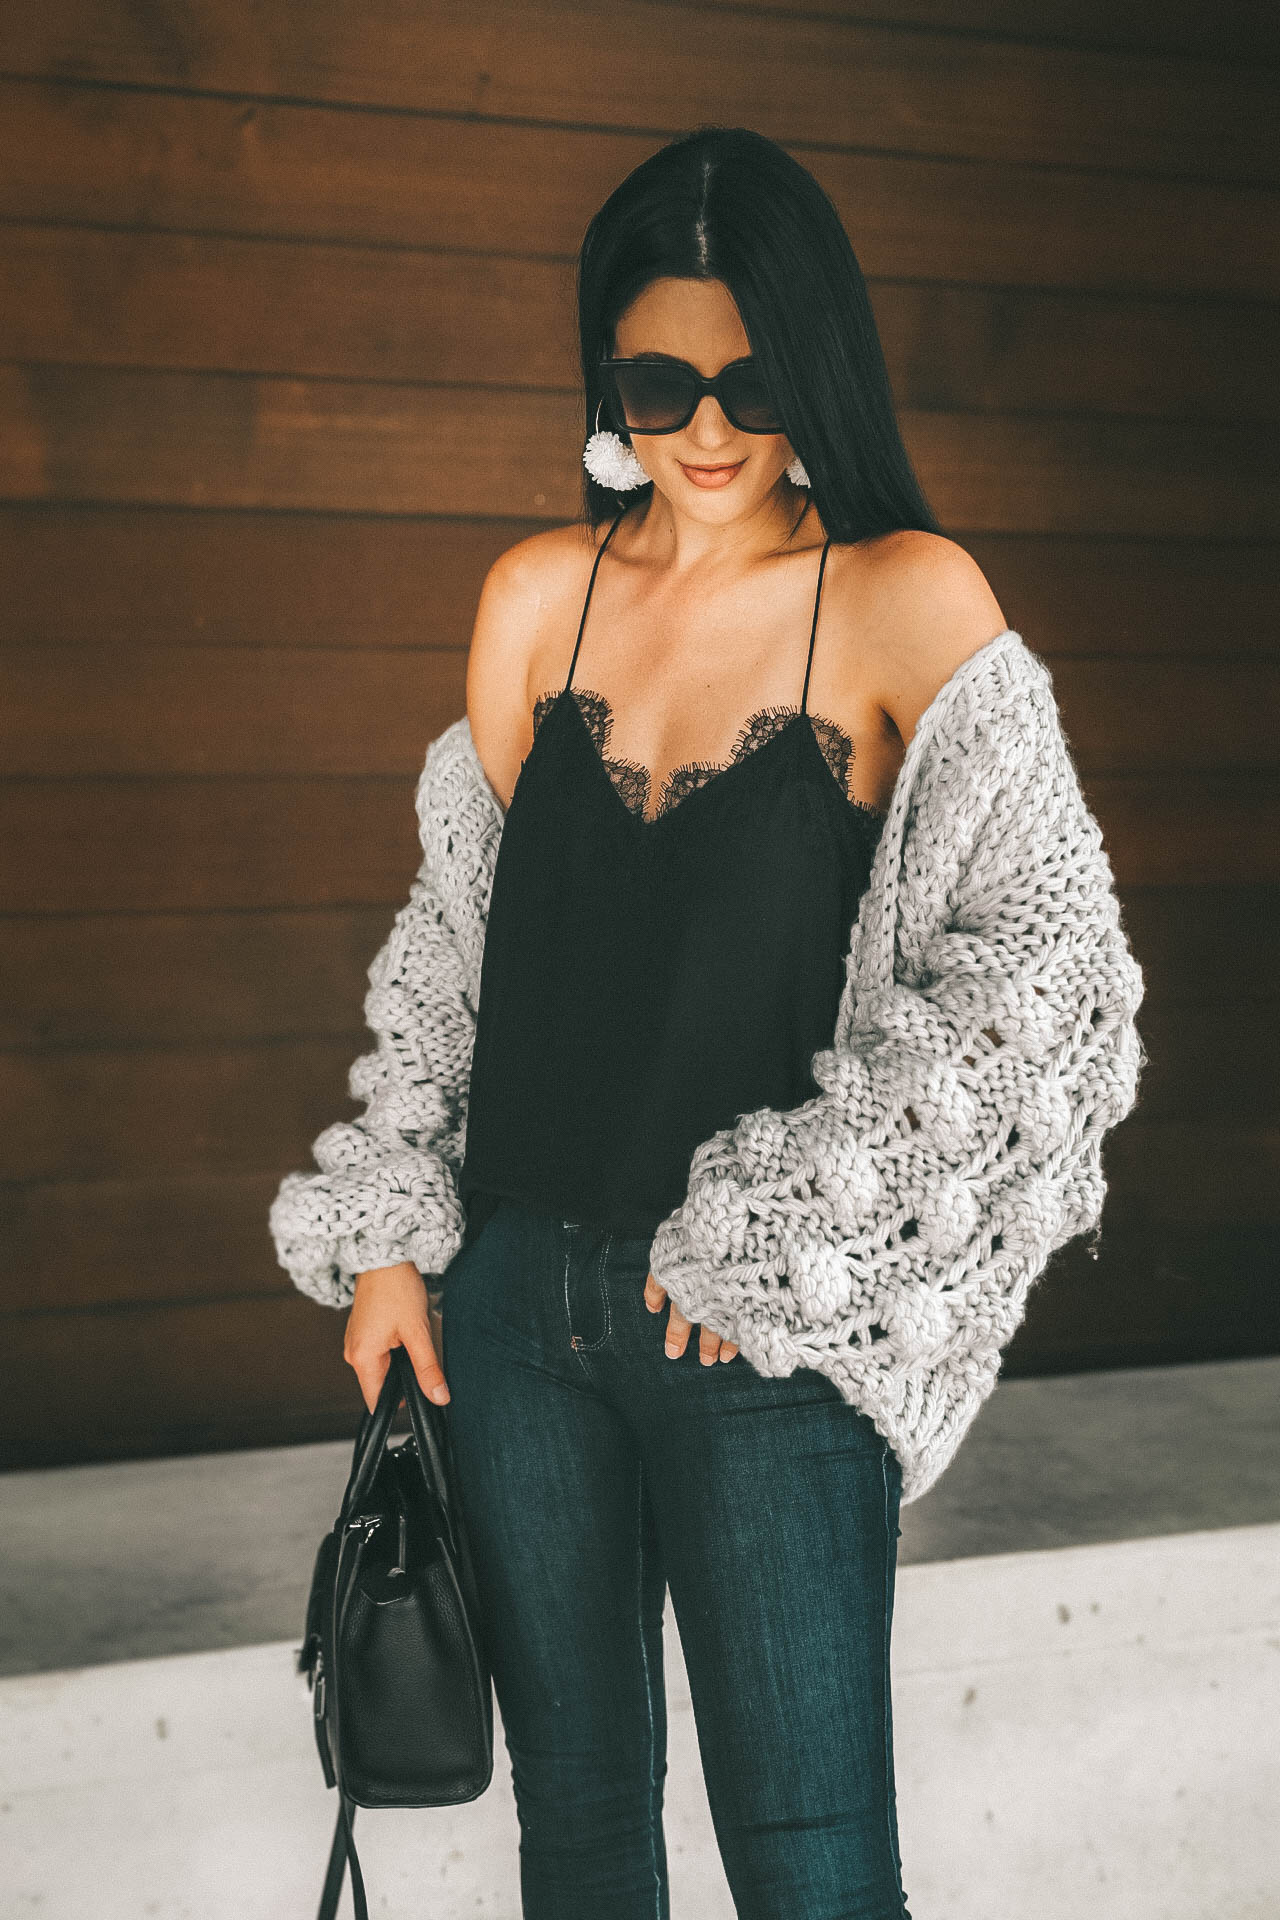 DTKAustin is sharing details on 12 of her must have, affordable cardigans to transition into Fall. Each cardigan is from Chicwish, handbag is Henri Bendel. | Knit Cardigan for Fall | how to style a knit cardigan | knit cardigan outfit || Dressed to Kill #fashion #style #womensoutfit #womensfashion #cardigan #knit #knitcardigan #fallstyle #streetstyle #fallfashion #dtkaustin | Cozy Cardigan: I Like Knit Like That featured by popular Austin fashion blogger Dressed to Kill